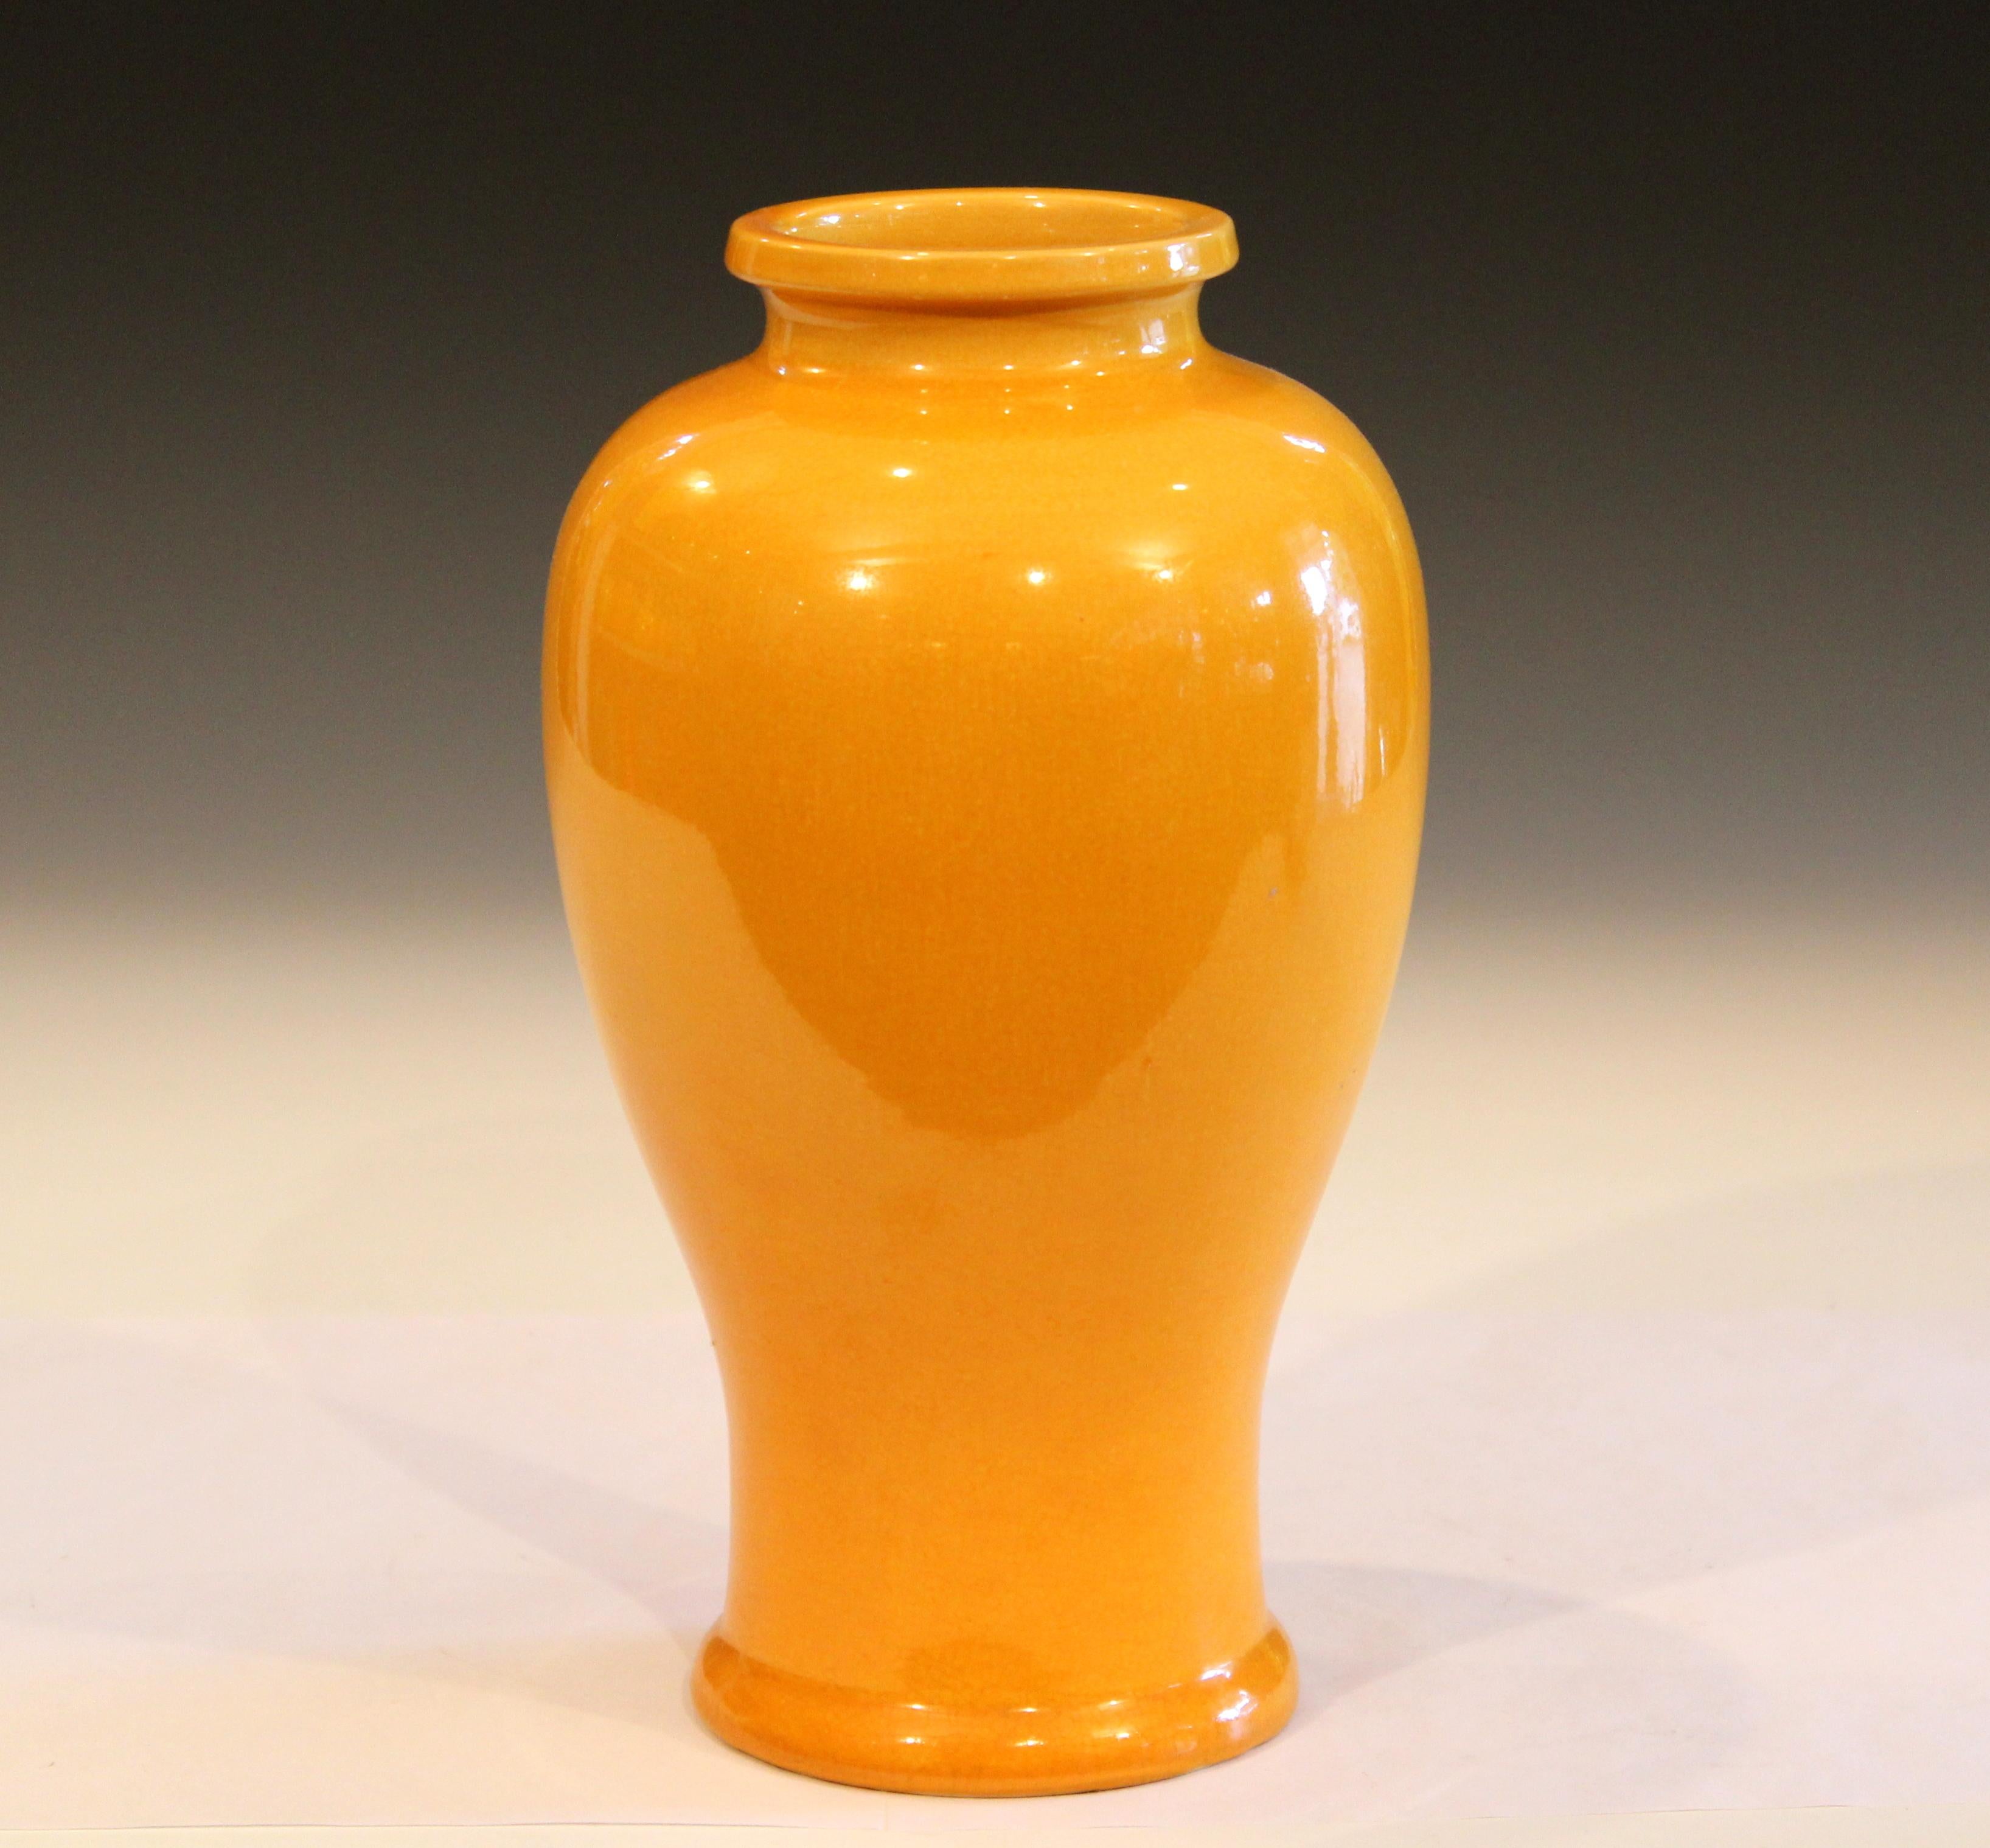 Awaji Pottery vase in finely crackled warm yellow glaze, circa 1930. Impressed export mark. Measure: 8 3/4